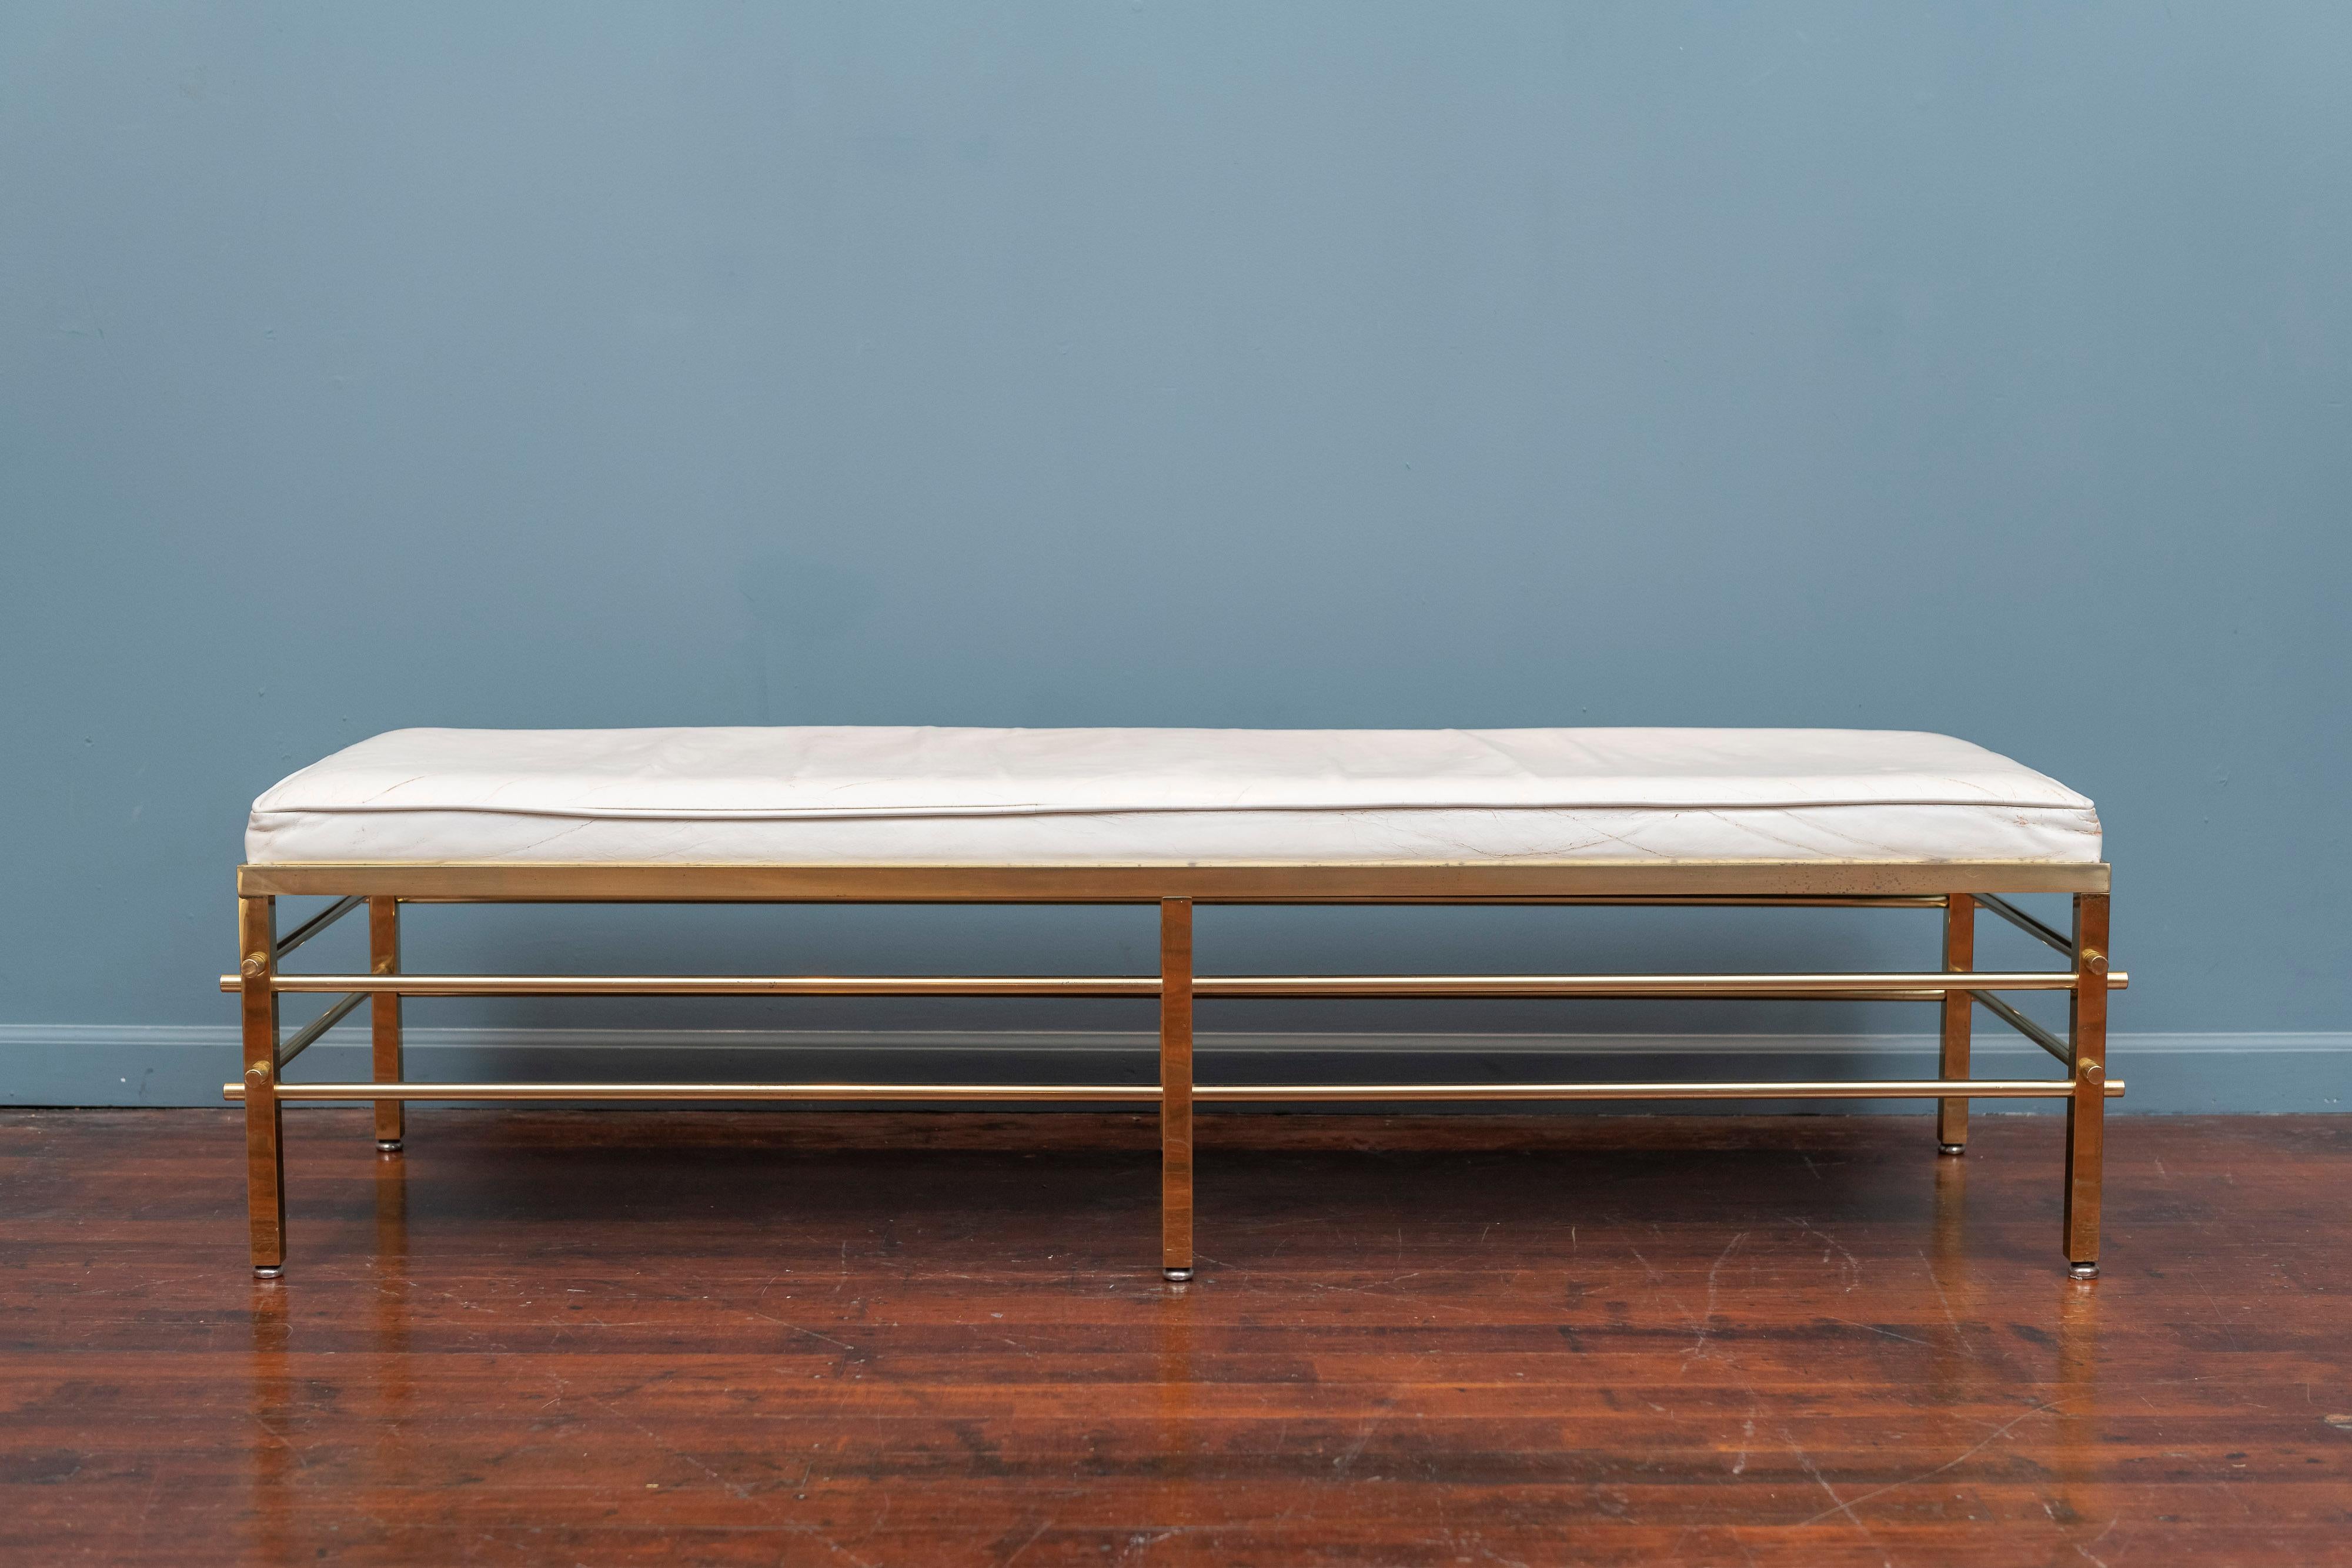 Tommi Parzinger design bench for Parzinger Originals, N.Y. Upholstered in what appears to be the original white leather on a brass tubular studded frame. A rare design made with high quality construction and attention to detail,